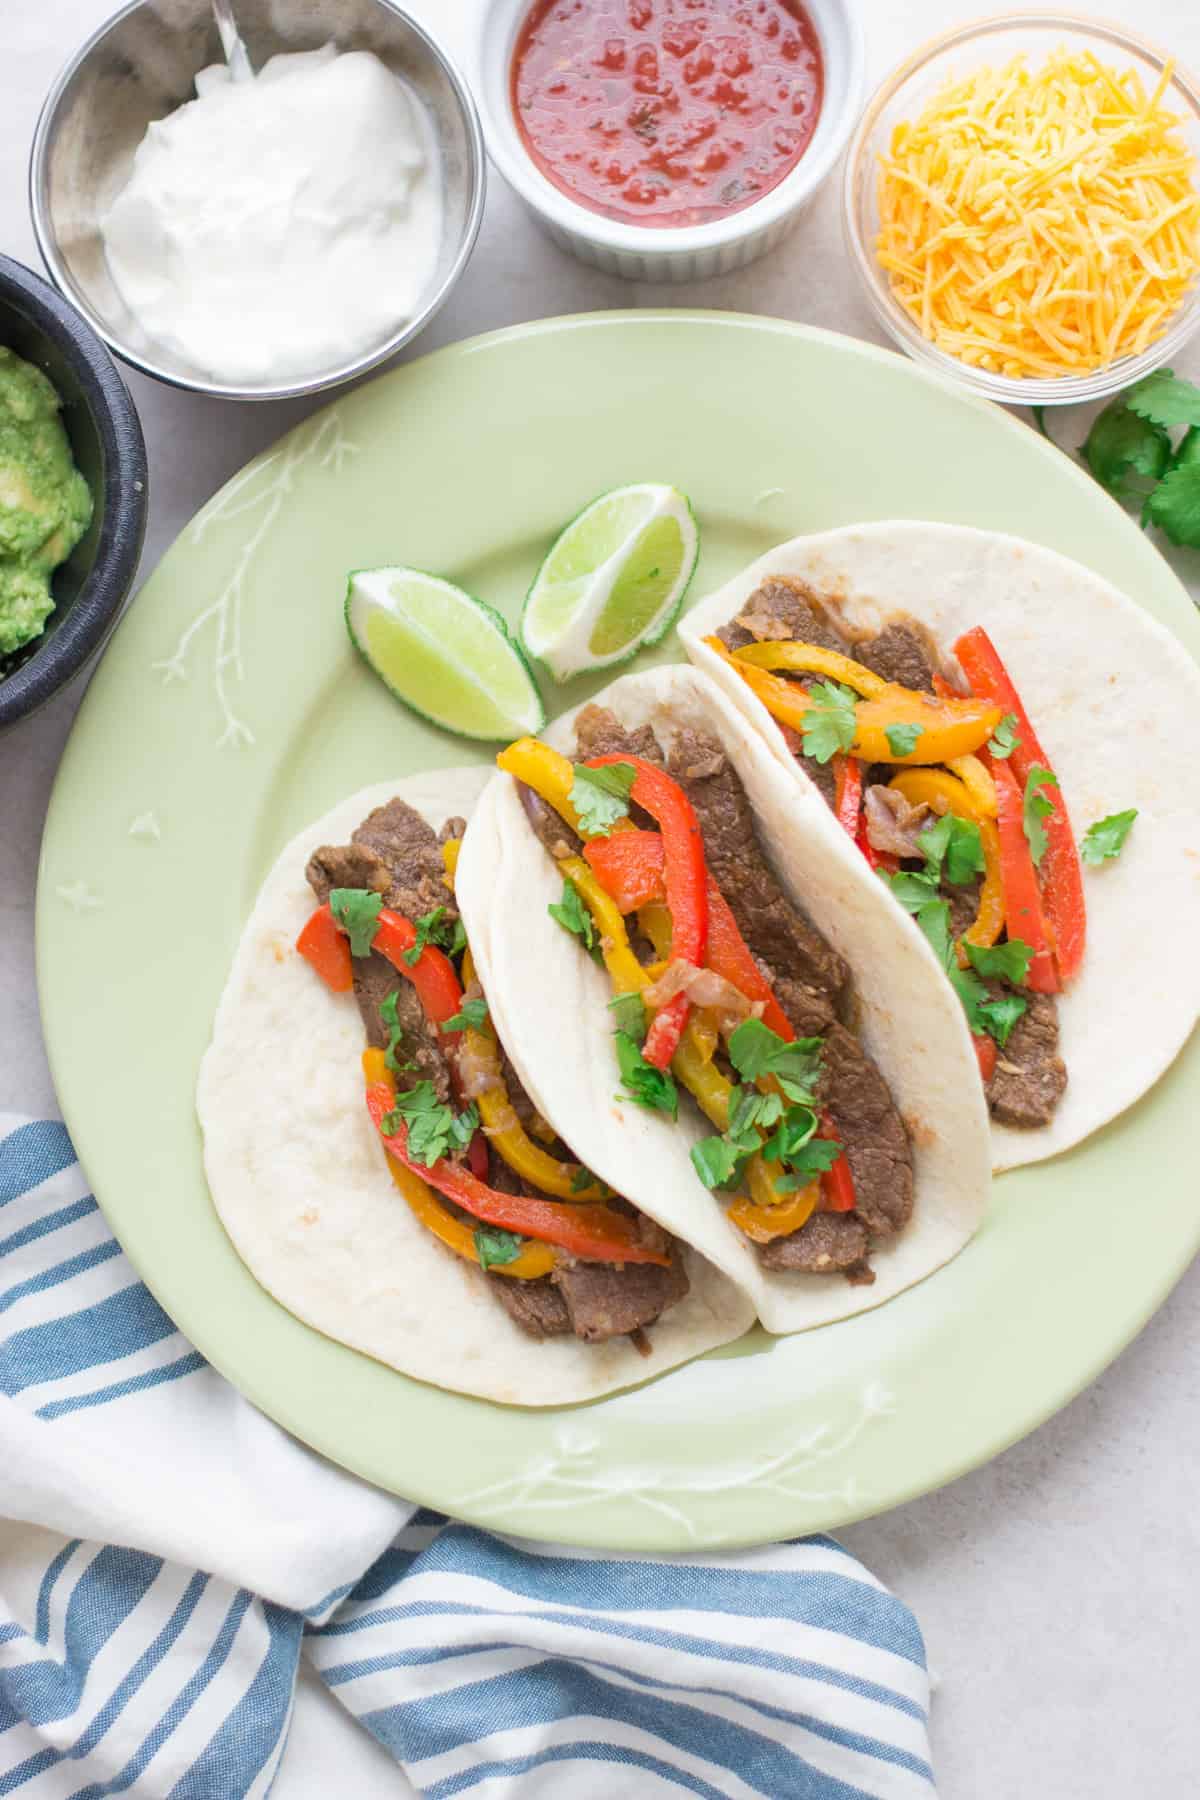 a close up shot of three steak fajita tacos with bell peppers, cilantro, and lime slices.